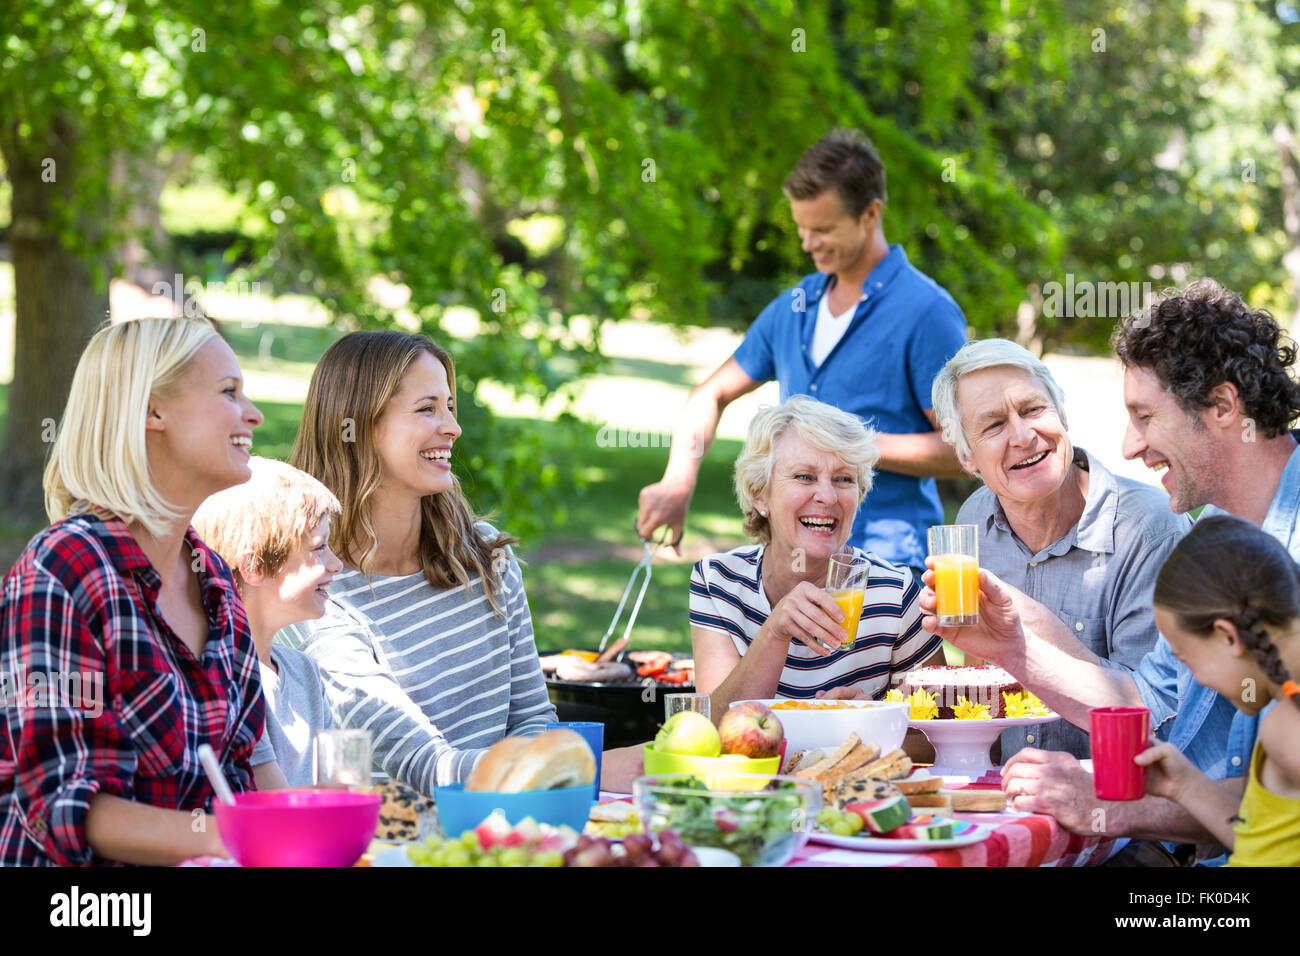 Family and friends having a picnic with barbecue Stock Photo